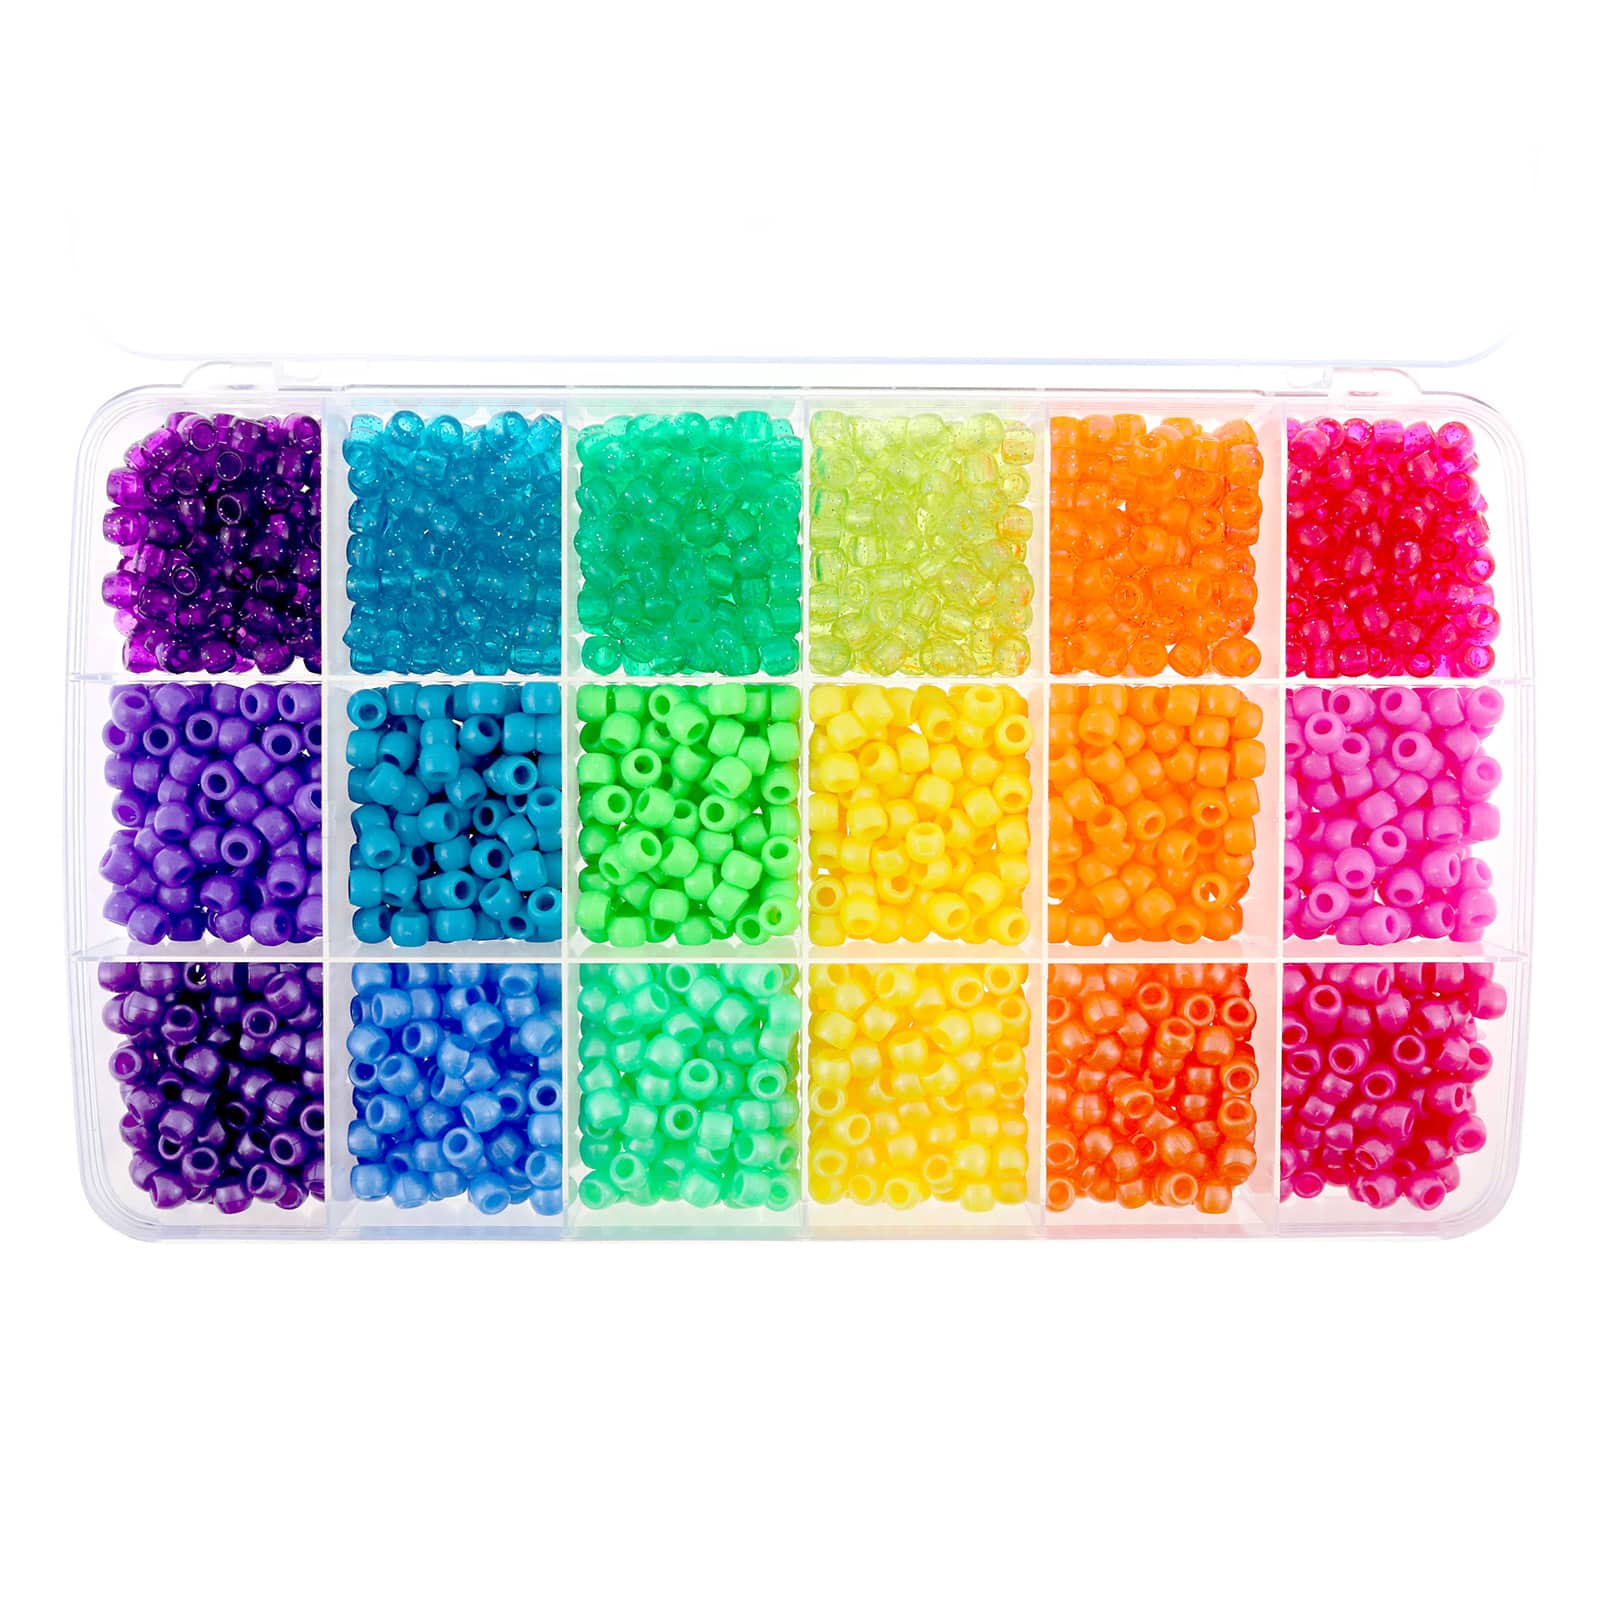 12 Packs: 280 ct. (3,360 total) Color Change Clear Pony Beads by